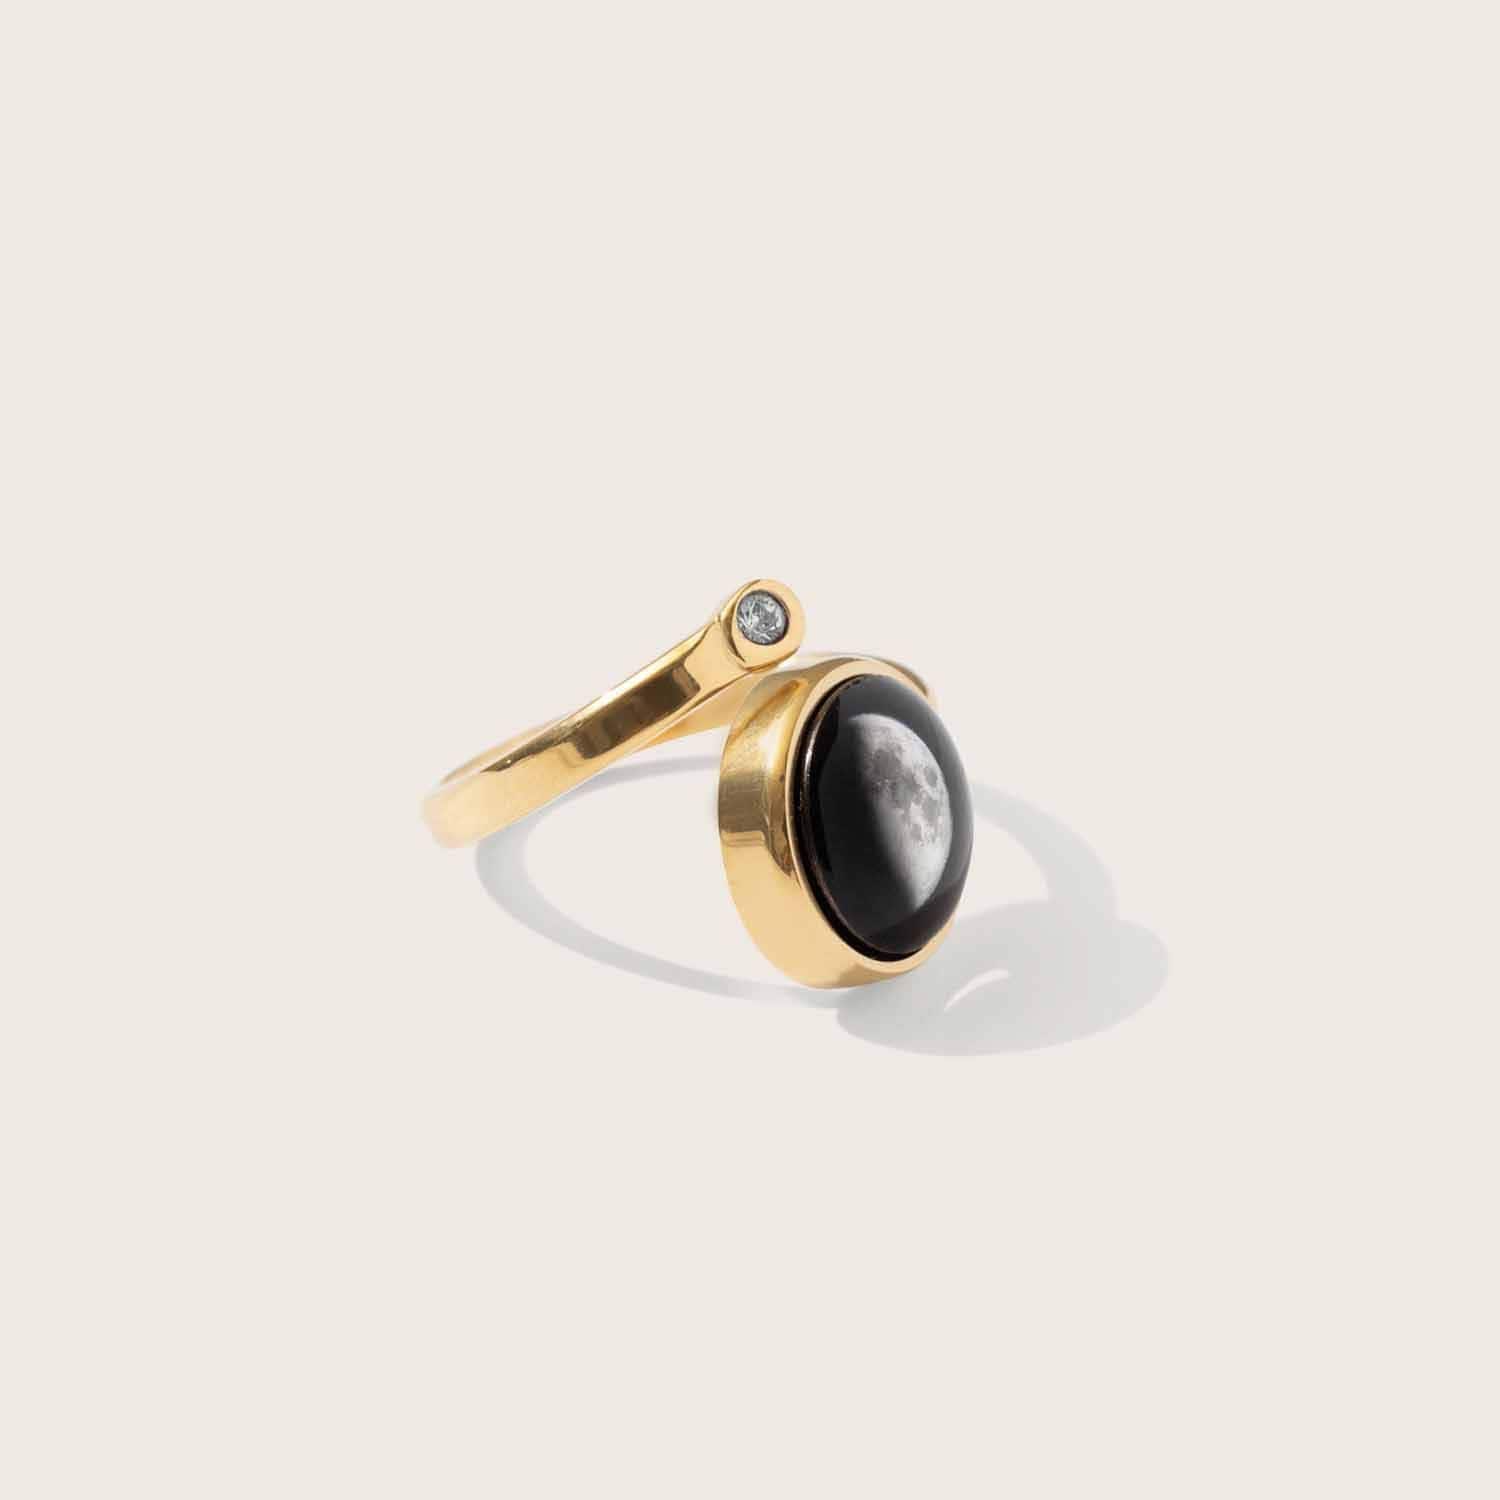 Moonglow Cosmic Spiral Adjustable Ring - Gold